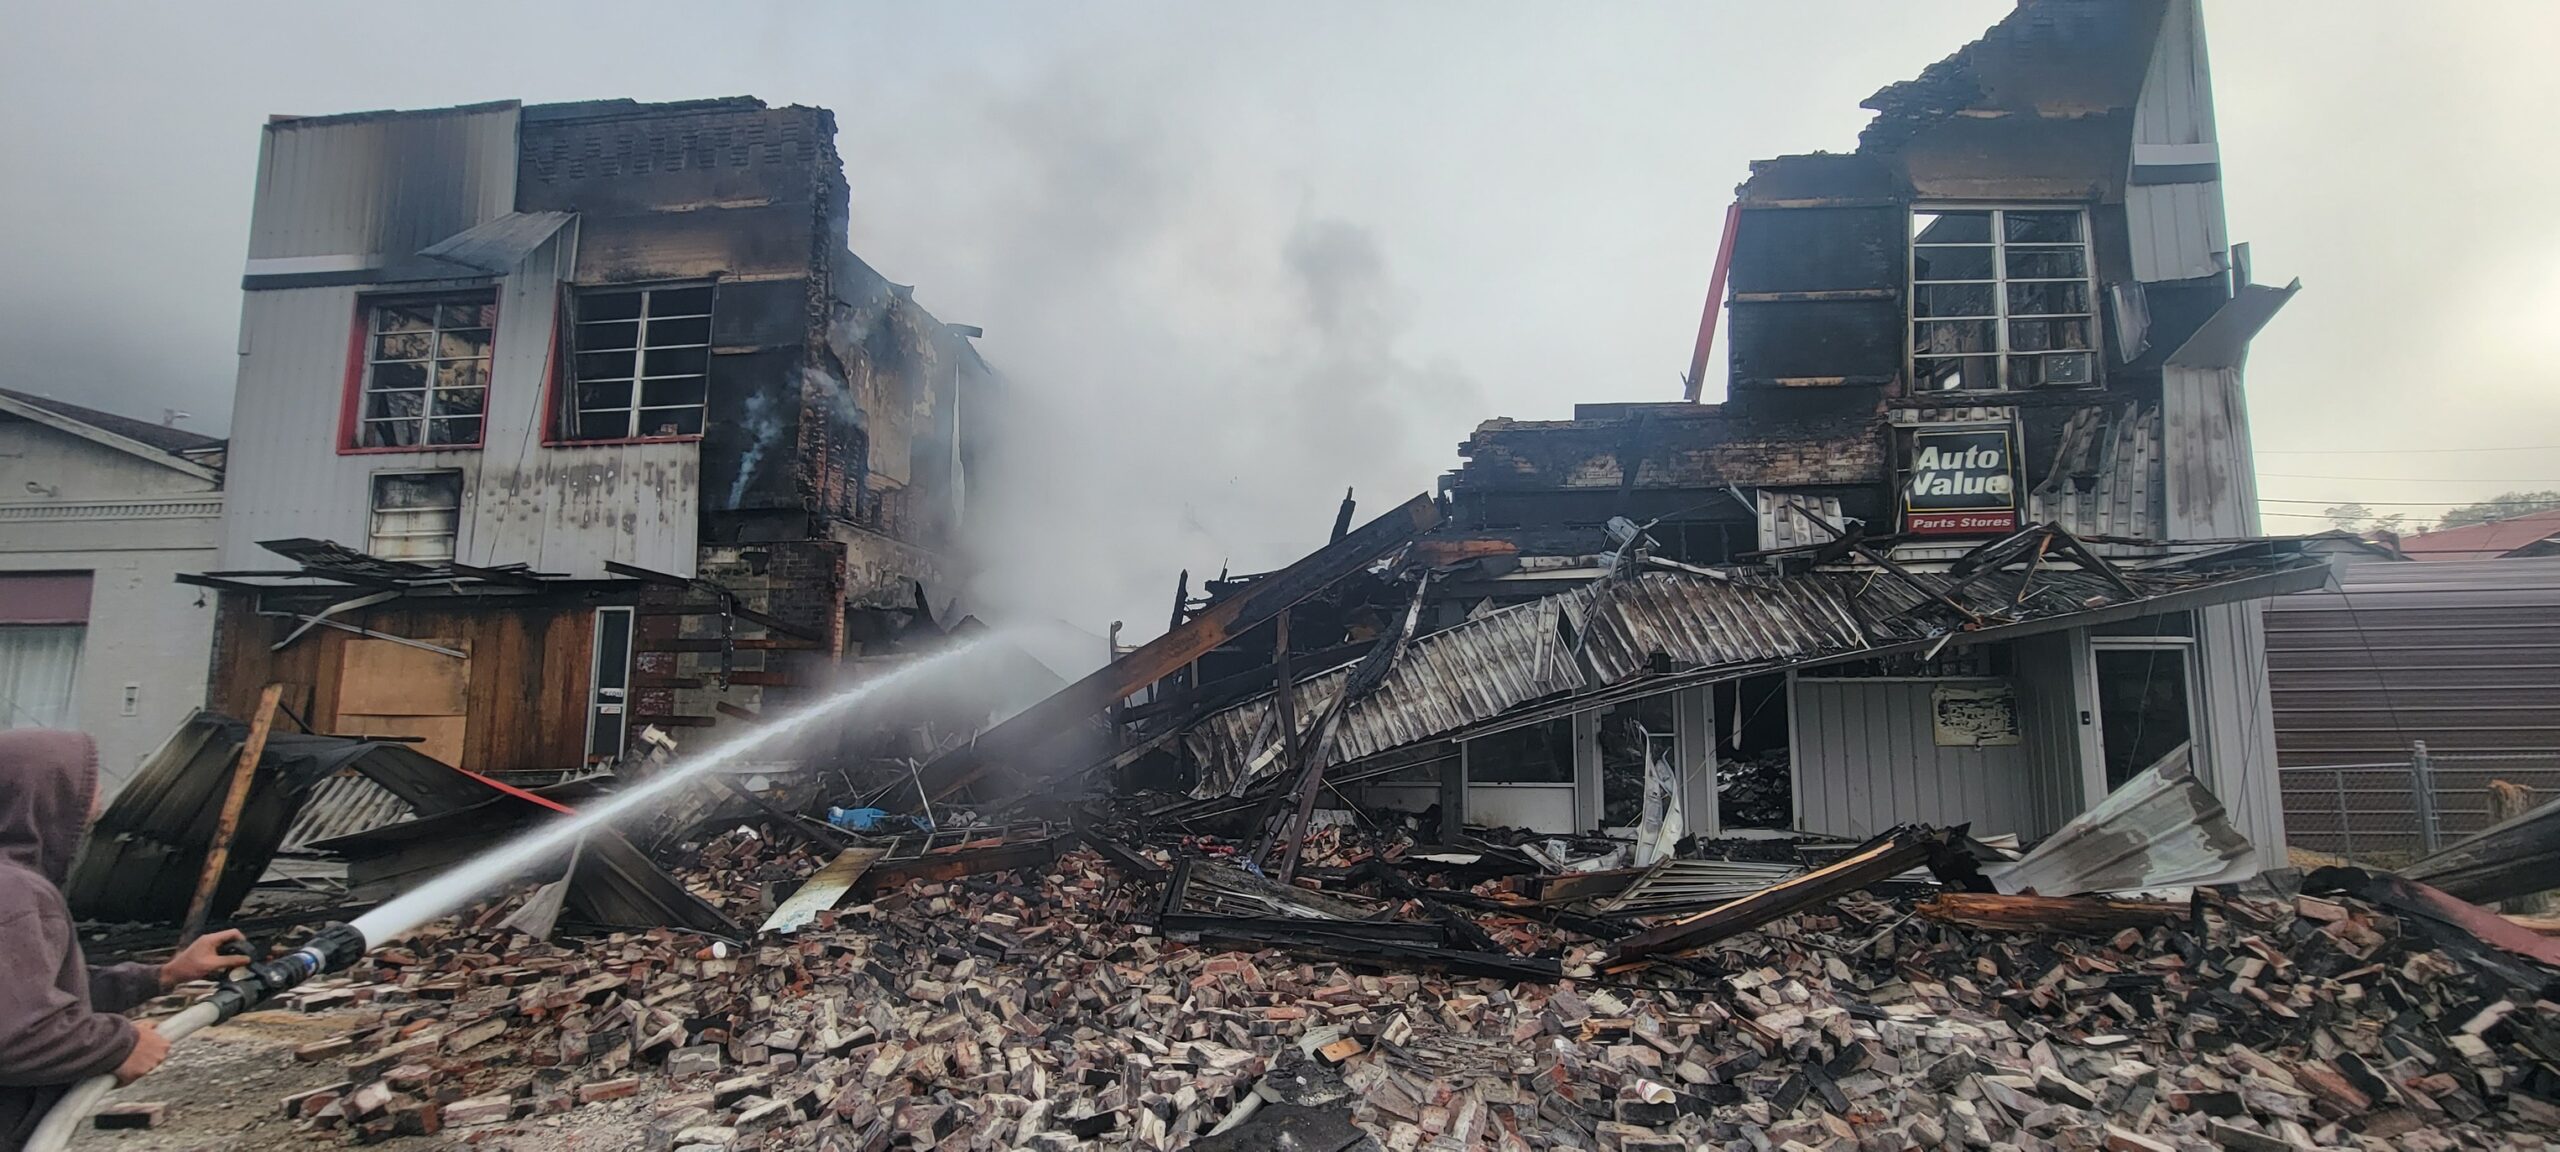 Firefighters injured in building collapse